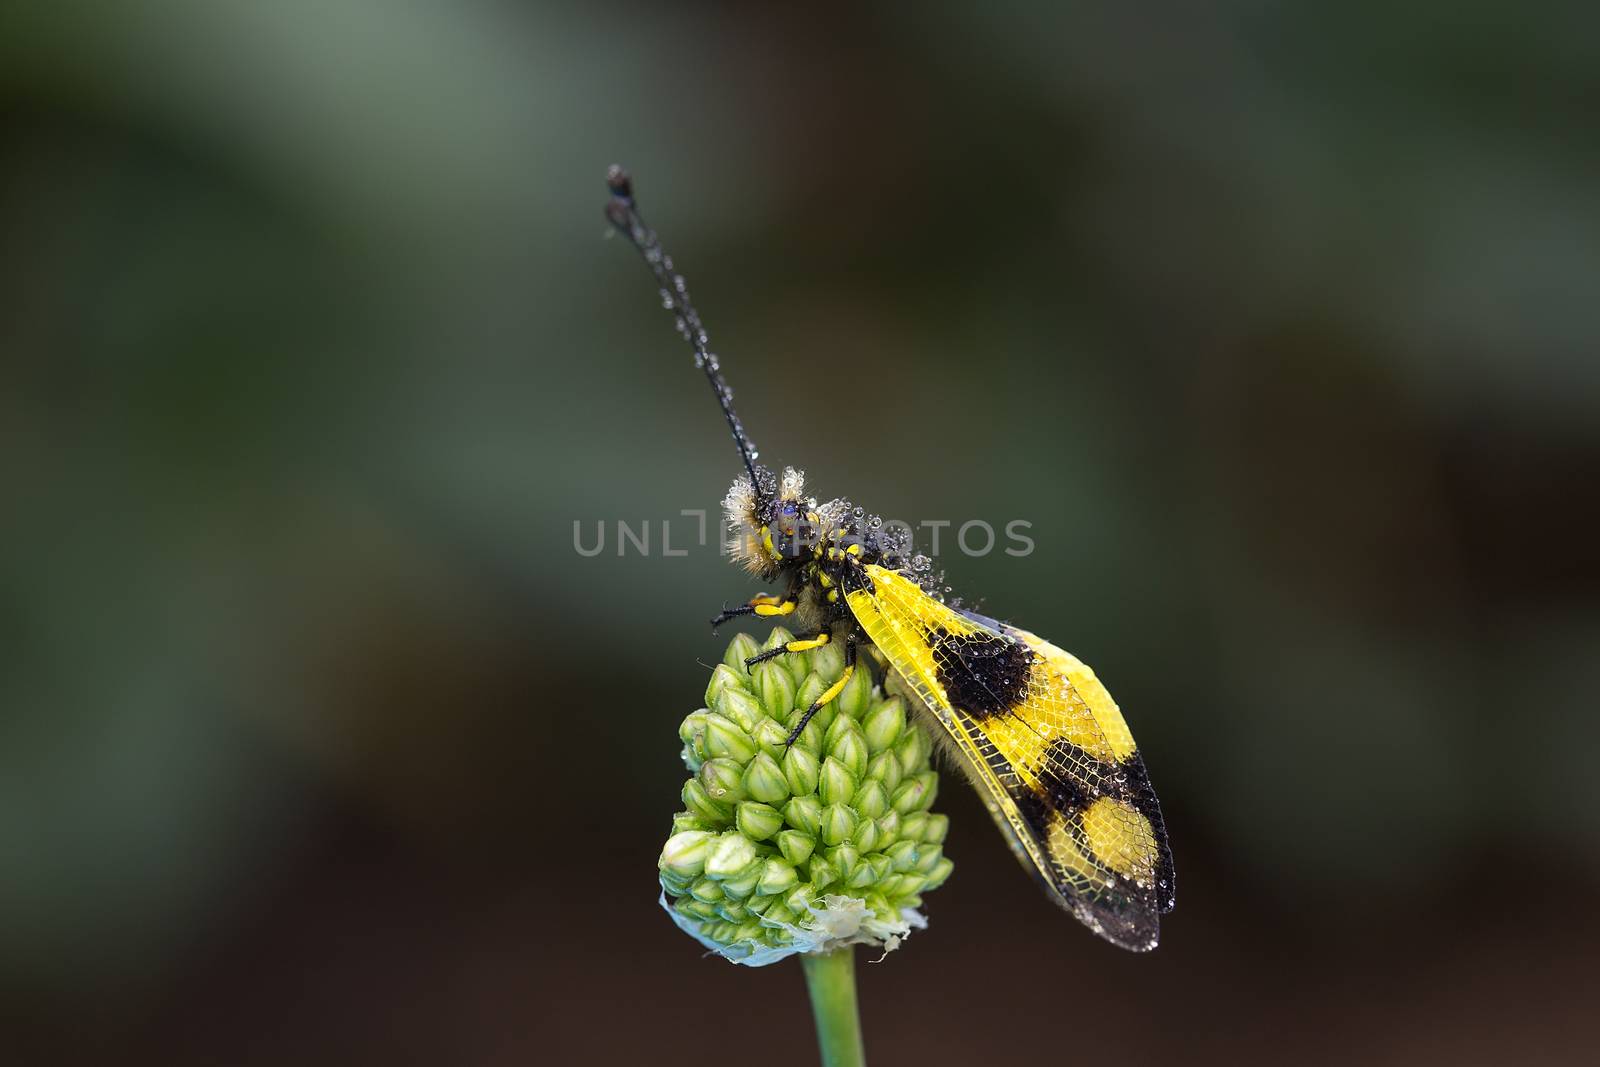 Macaronius owlfly (Libelloides macaronius) with water drops on small grass flower